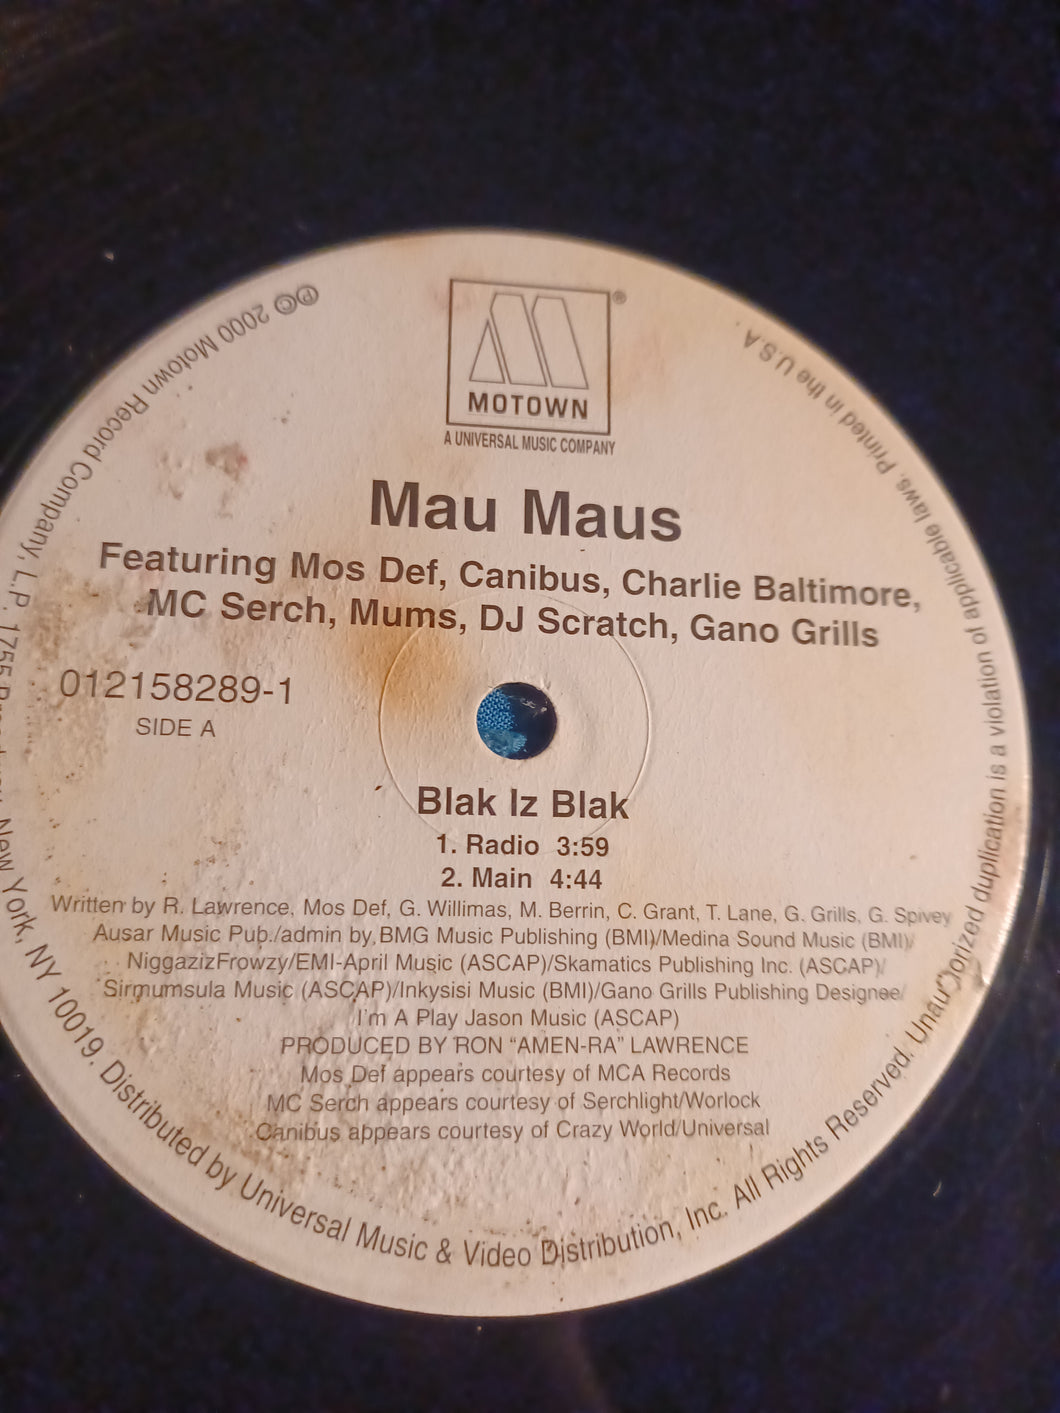 Mau Maus Blak is Blak from the Bamboozled Soundtrack 12